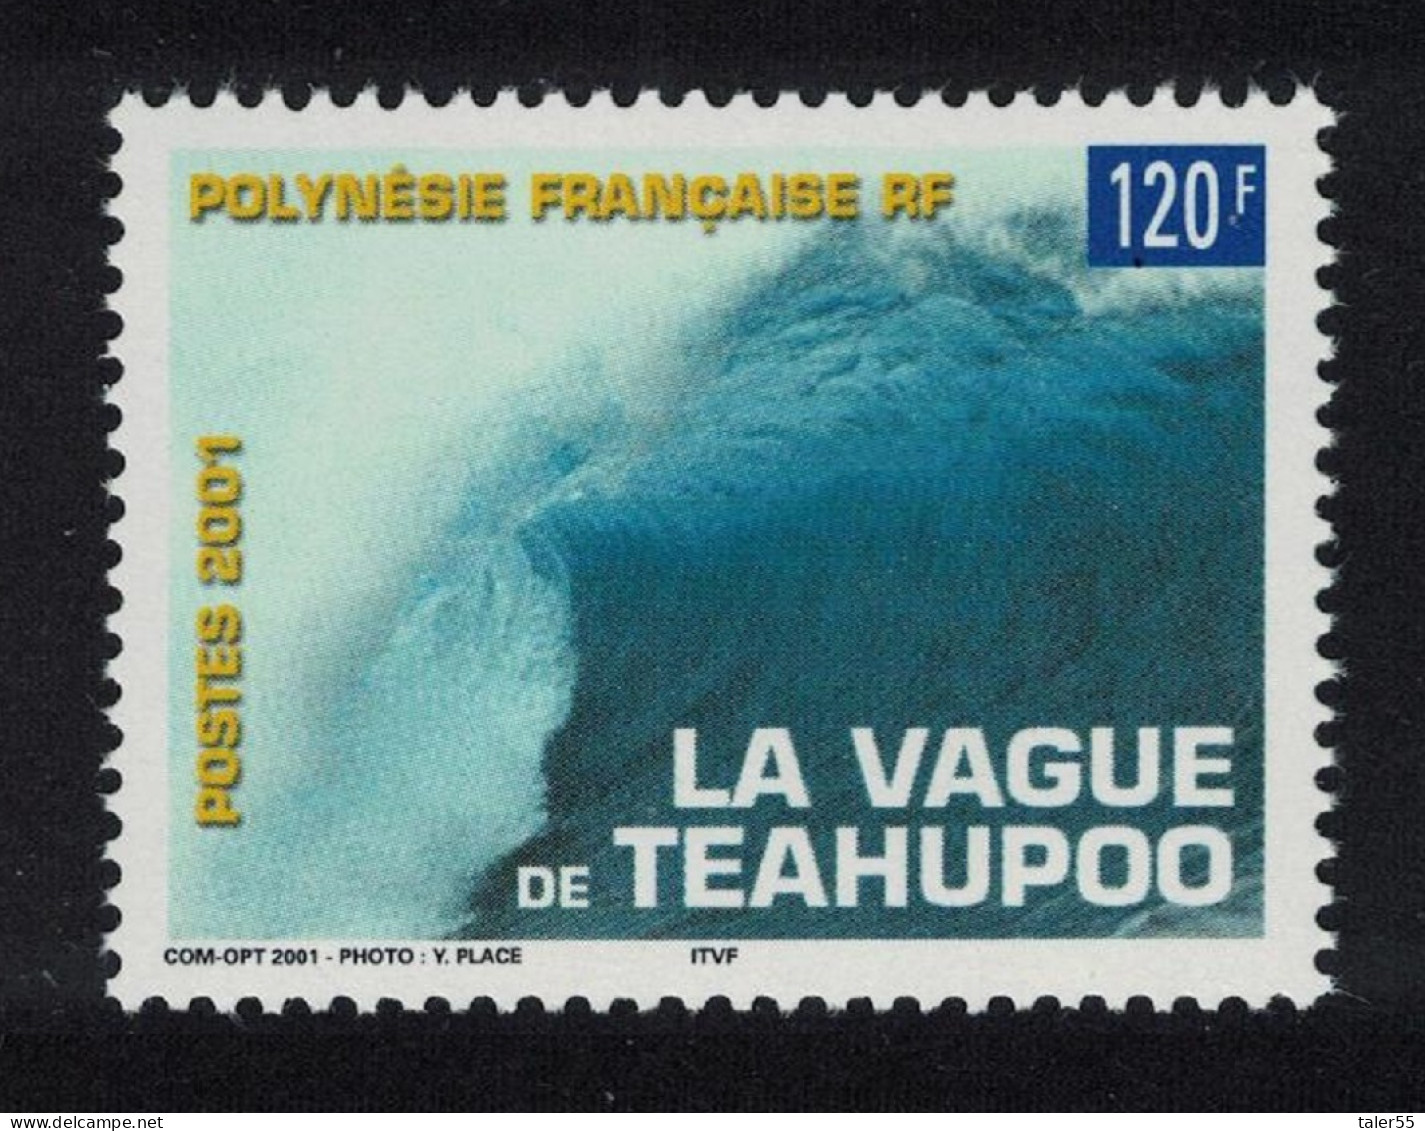 Fr. Polynesia Surfing The Heaviest Wave In The World Teahupoo 2001 MNH SG#907 - Nuevos